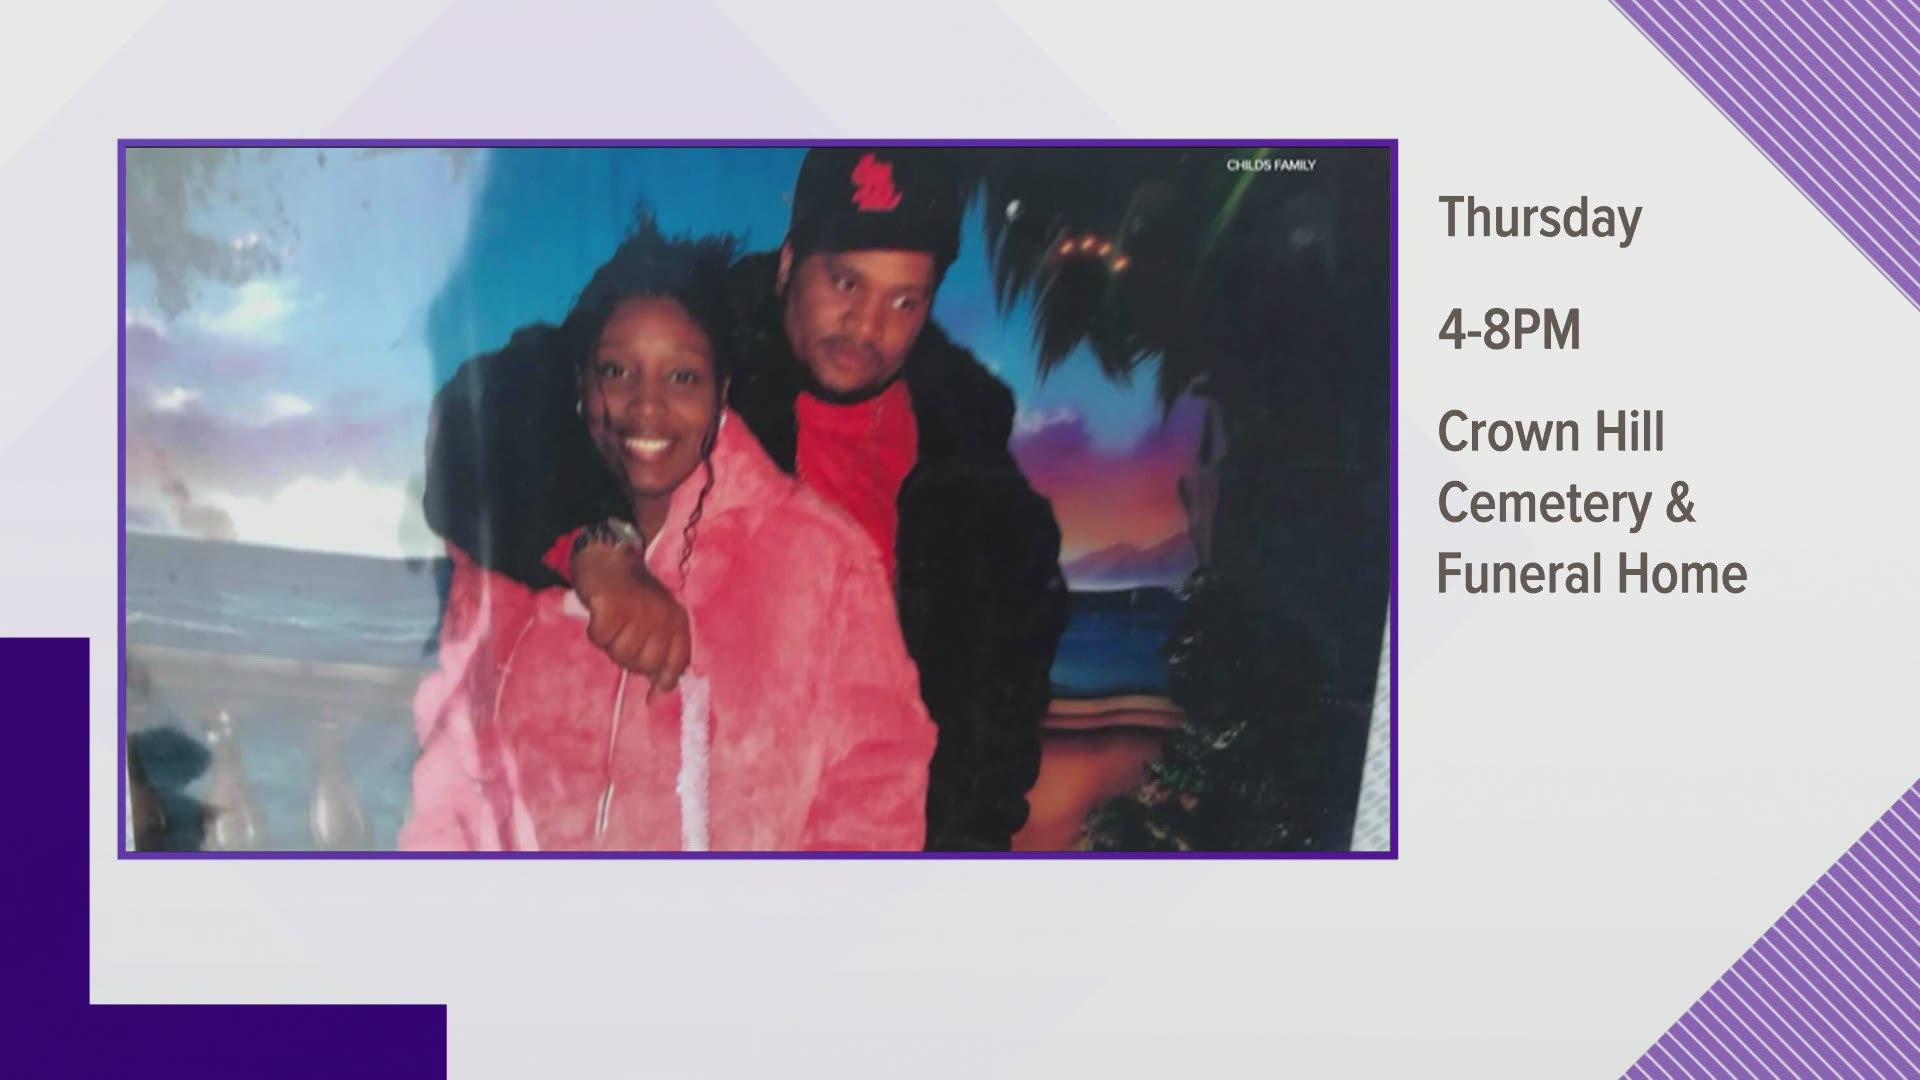 Thursday, there will be a visitation for an east side family killed in what the mayor's described as a mass murder.